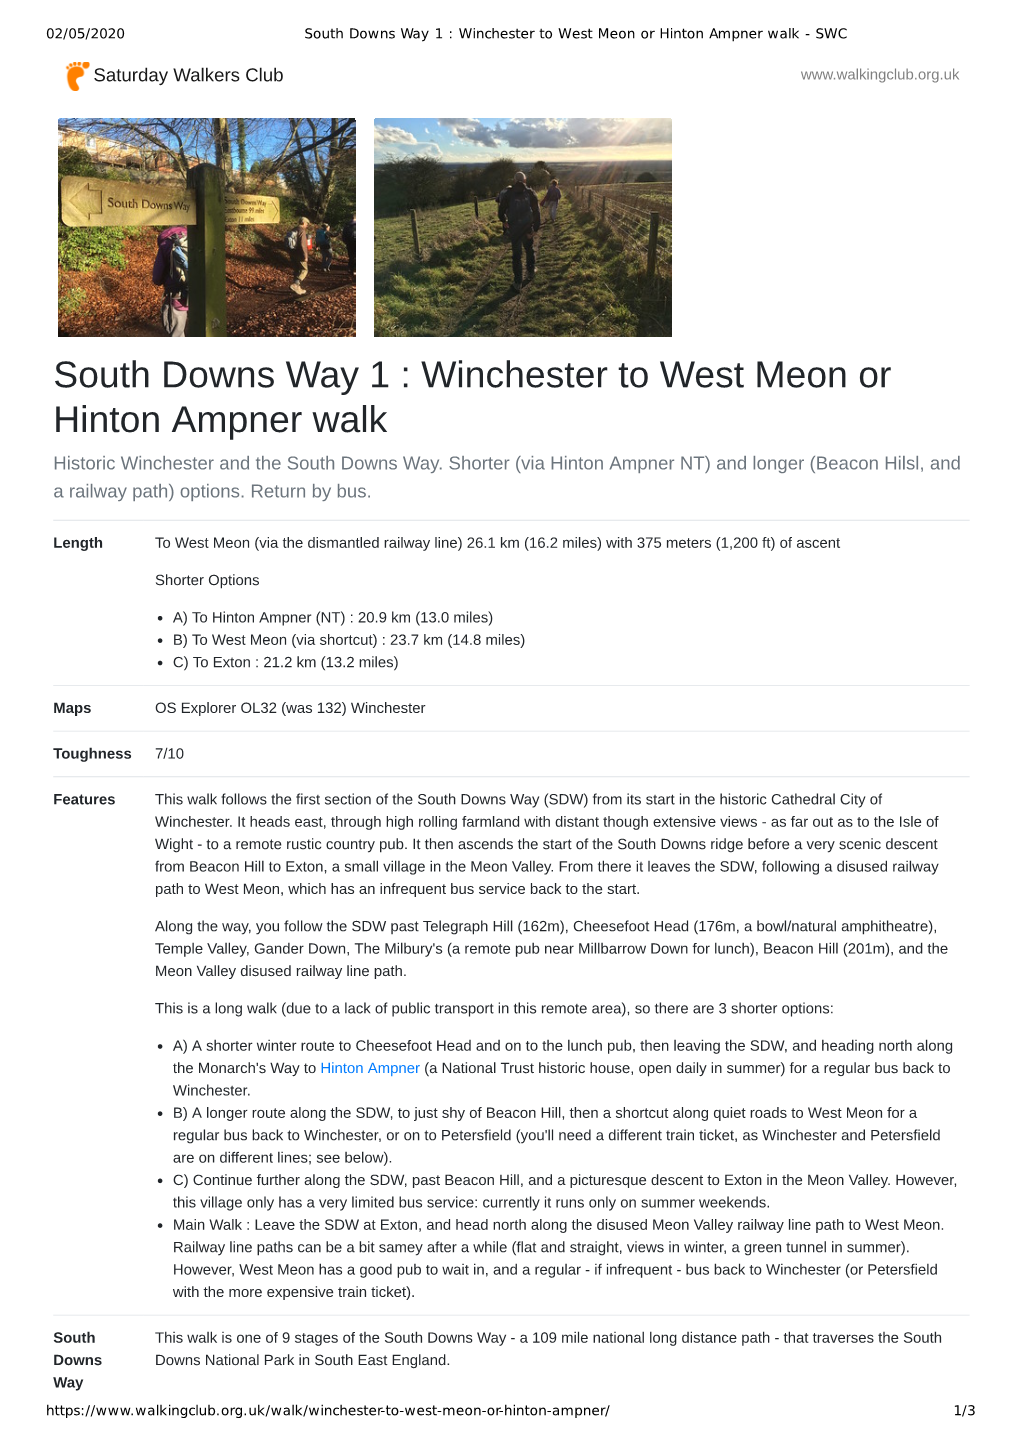 Winchester to West Meon Or Hinton Ampner Walk - SWC